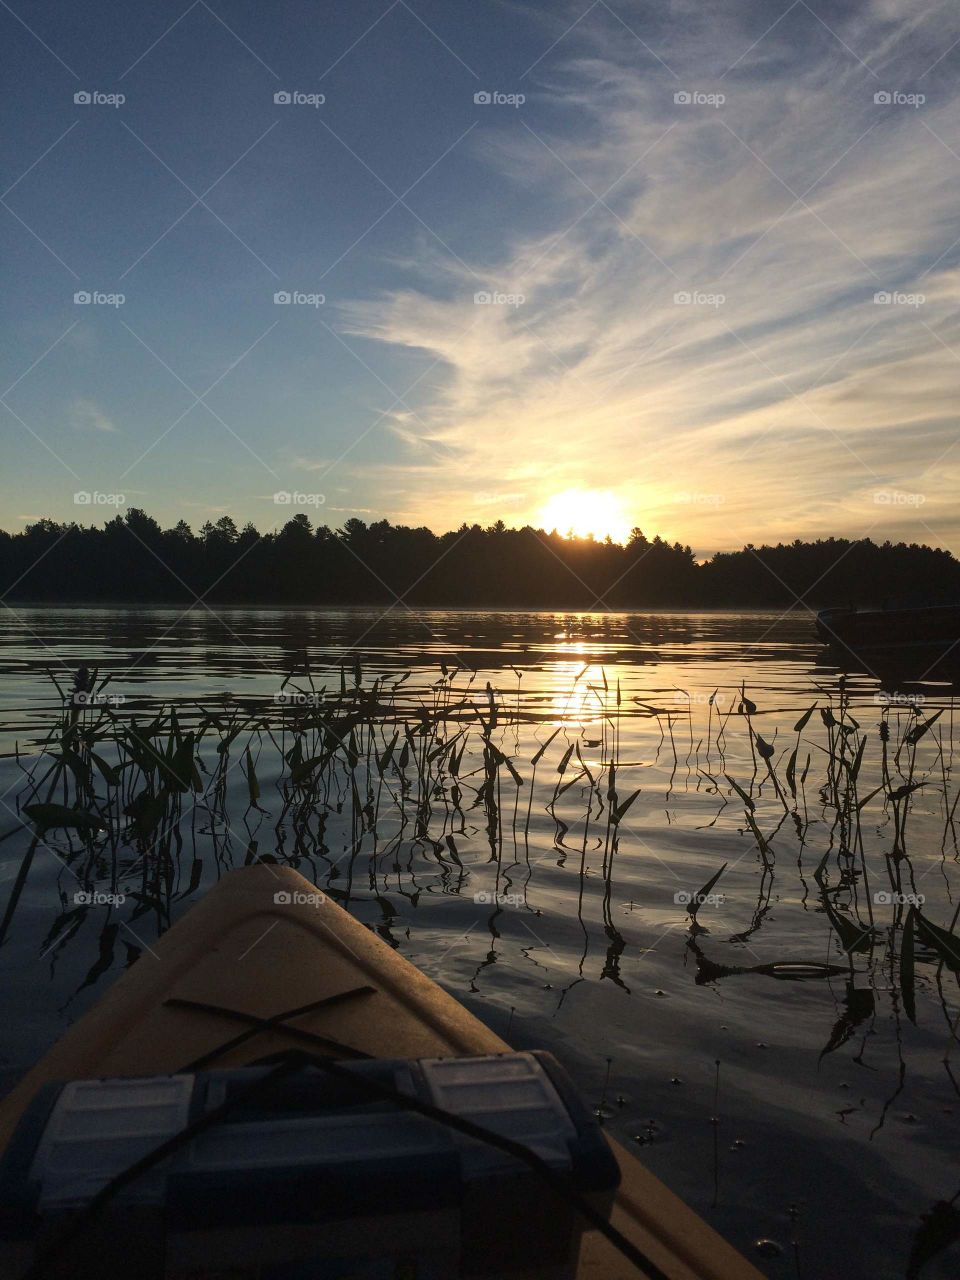 I'm not just sitting in a kayak, look around. I'm surrounded by such beauty. Sunrise, tree line, water crashing up against my kayak, singing birds, Lilly pads. This is my morning, this is my day, this is my serenity. 